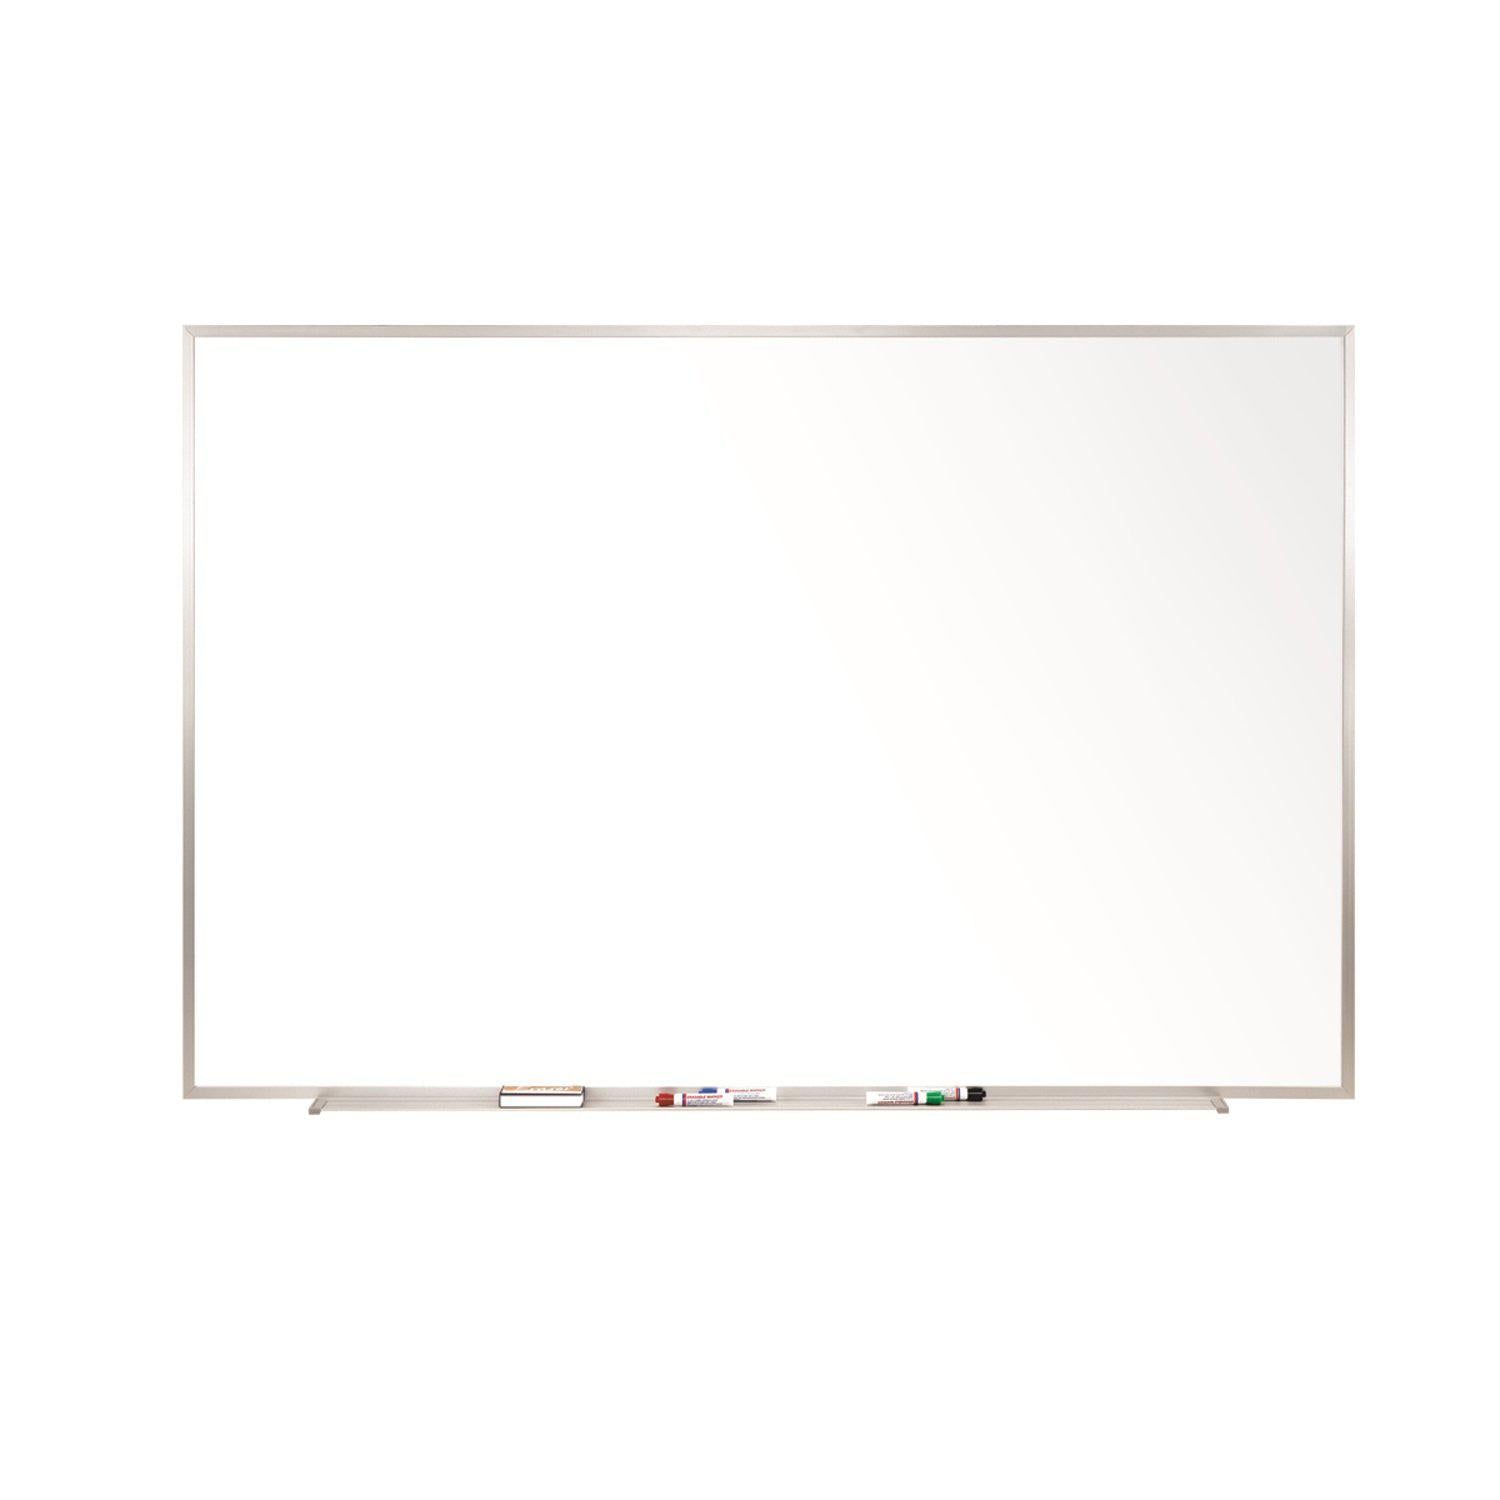 Magnetic Porcelain Whiteboard with Detachable Marker Tray, Satin Aluminum Frame, 4' H x 8' W, LIFETIME WARRANTY